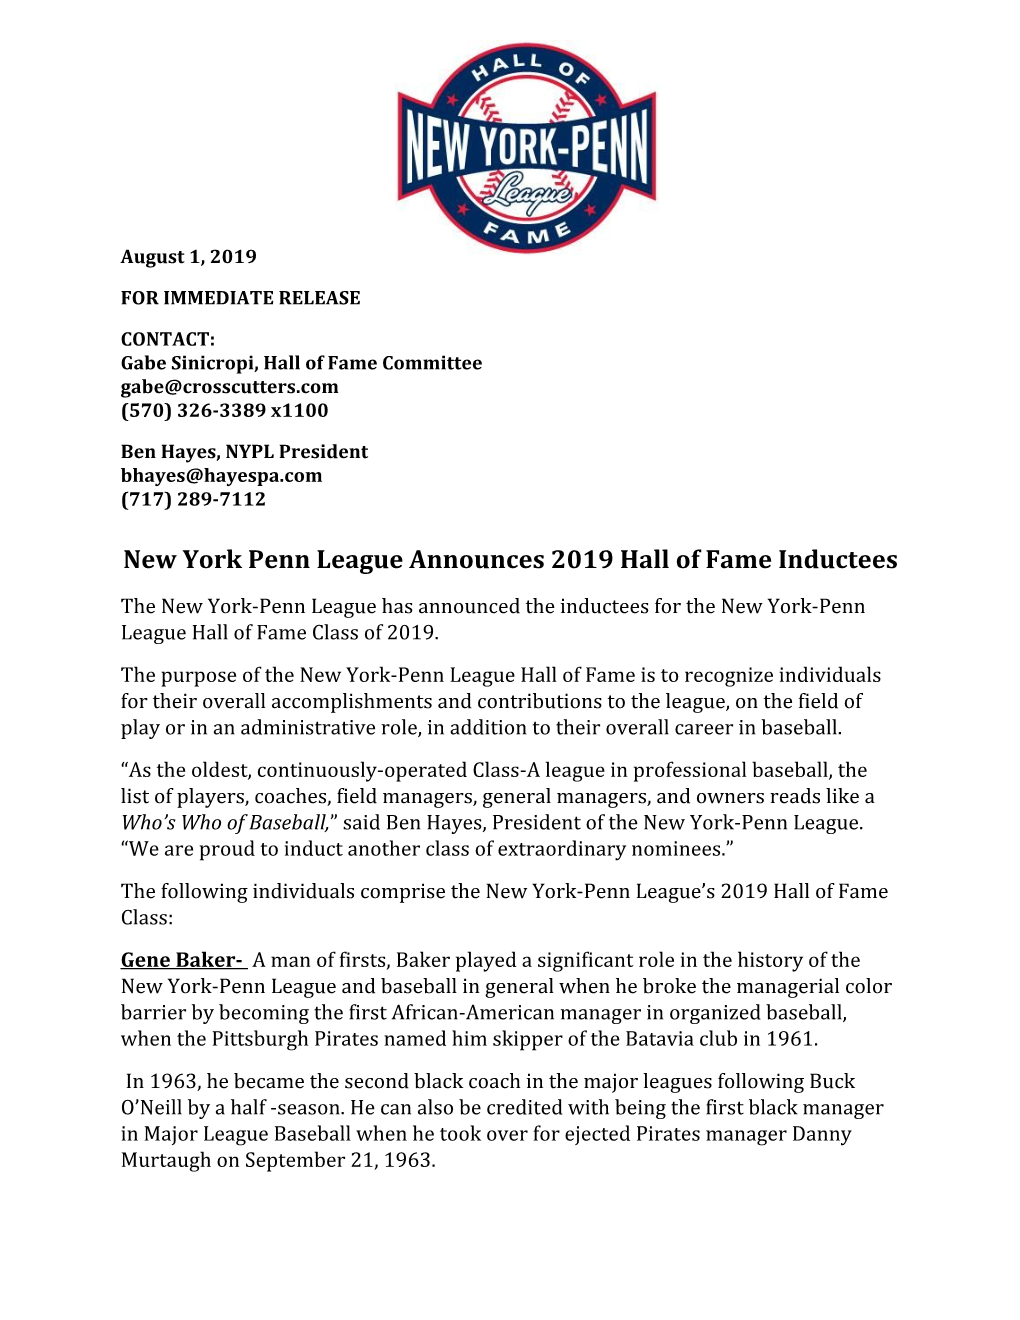 New York Penn League Announces 2019 Hall of Fame Inductees